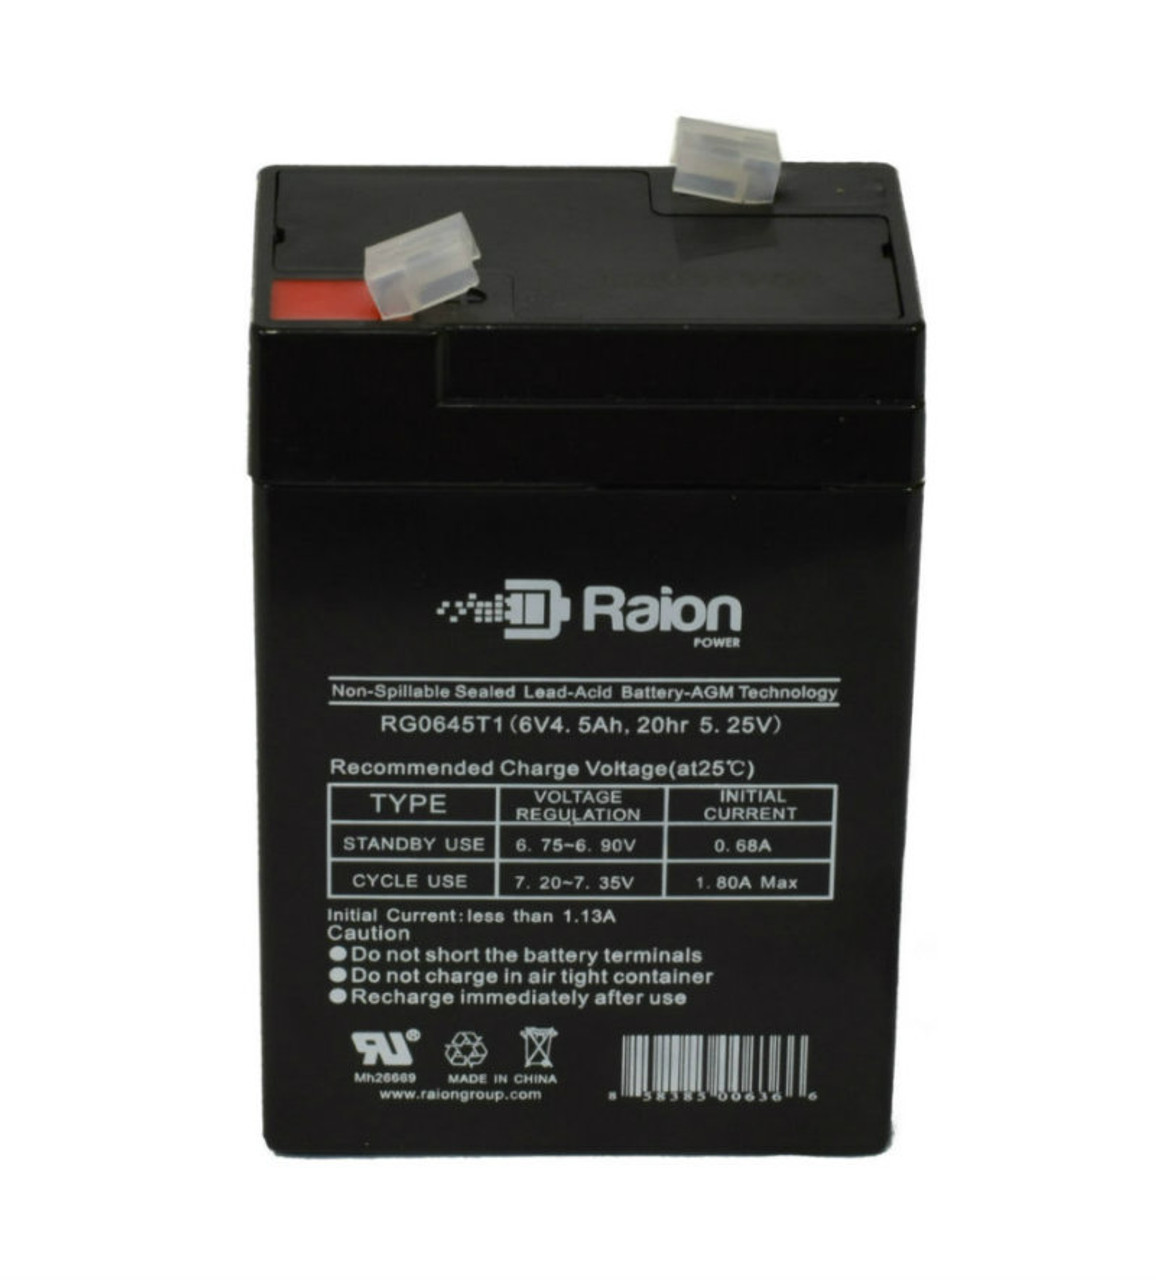 Raion Power RG0645T1 Replacement Battery Cartridge for Power Mate PM640/PM645